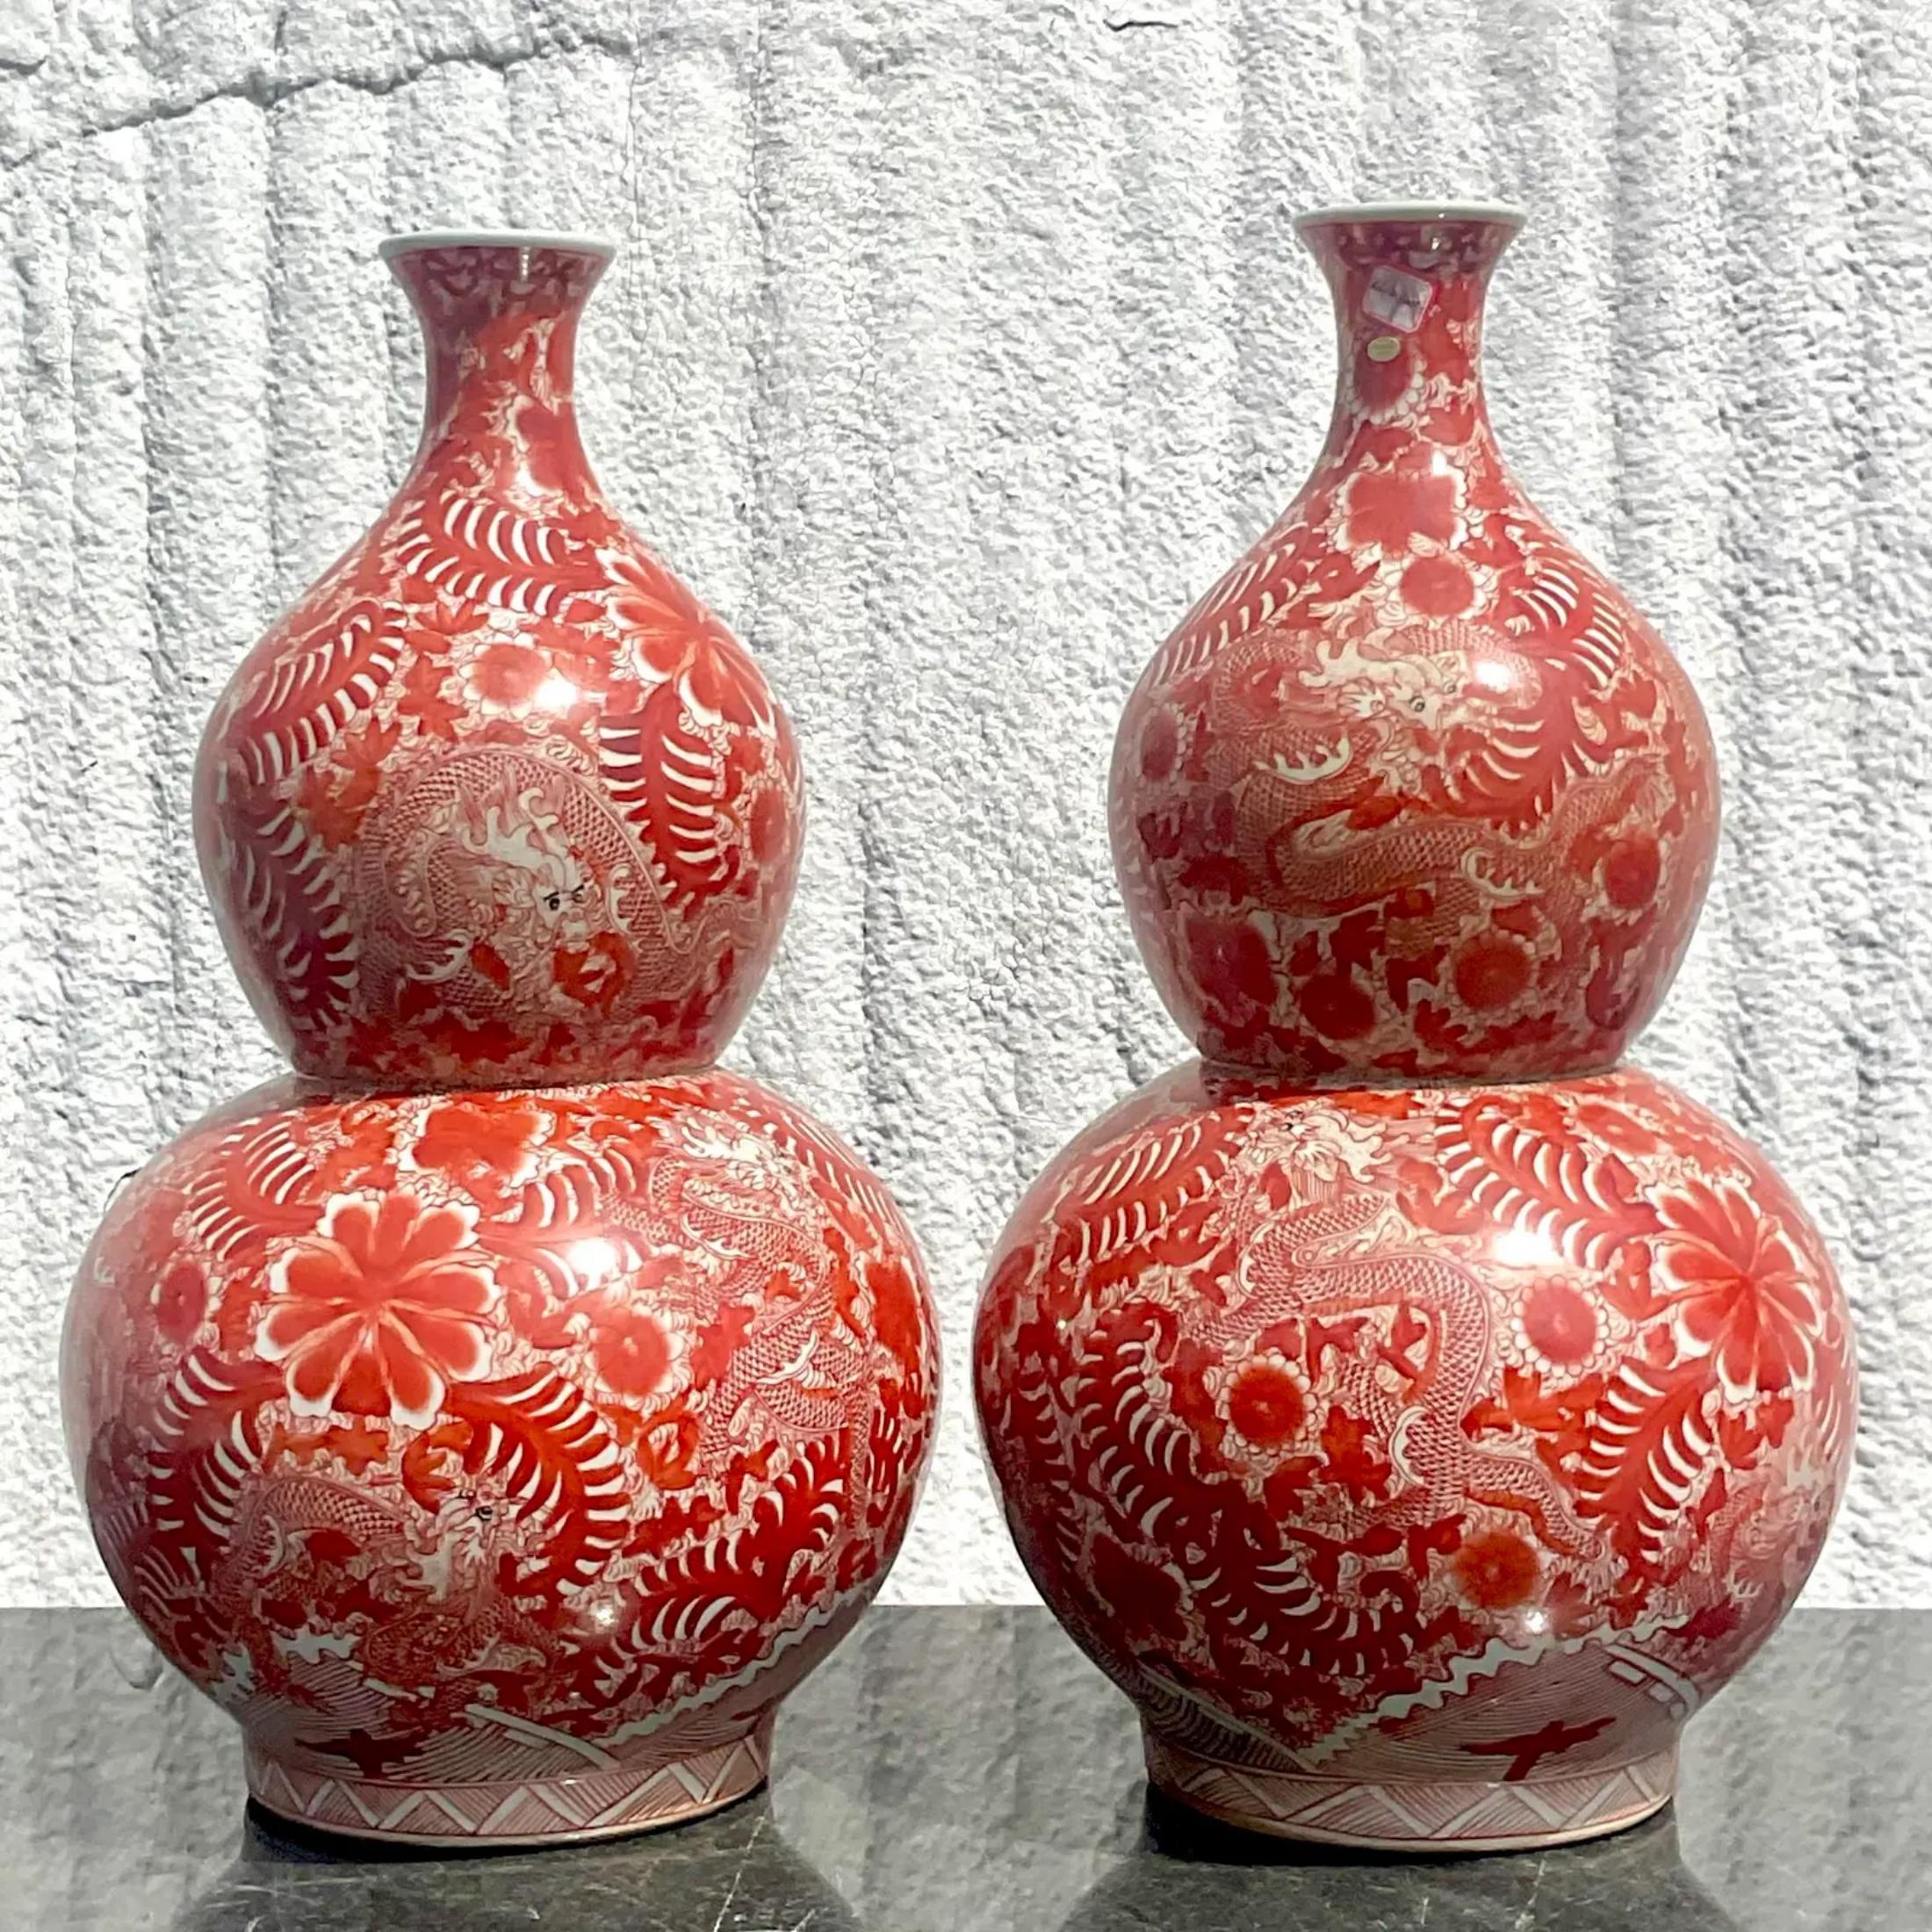 A pair of fabulous vintage Asian vases. This pair of Asian vases are in a beautiful shade of red with amazing details of dragons and flowers. It is an amazing piece to add to any room. Acquired in a Palm Beach estate.